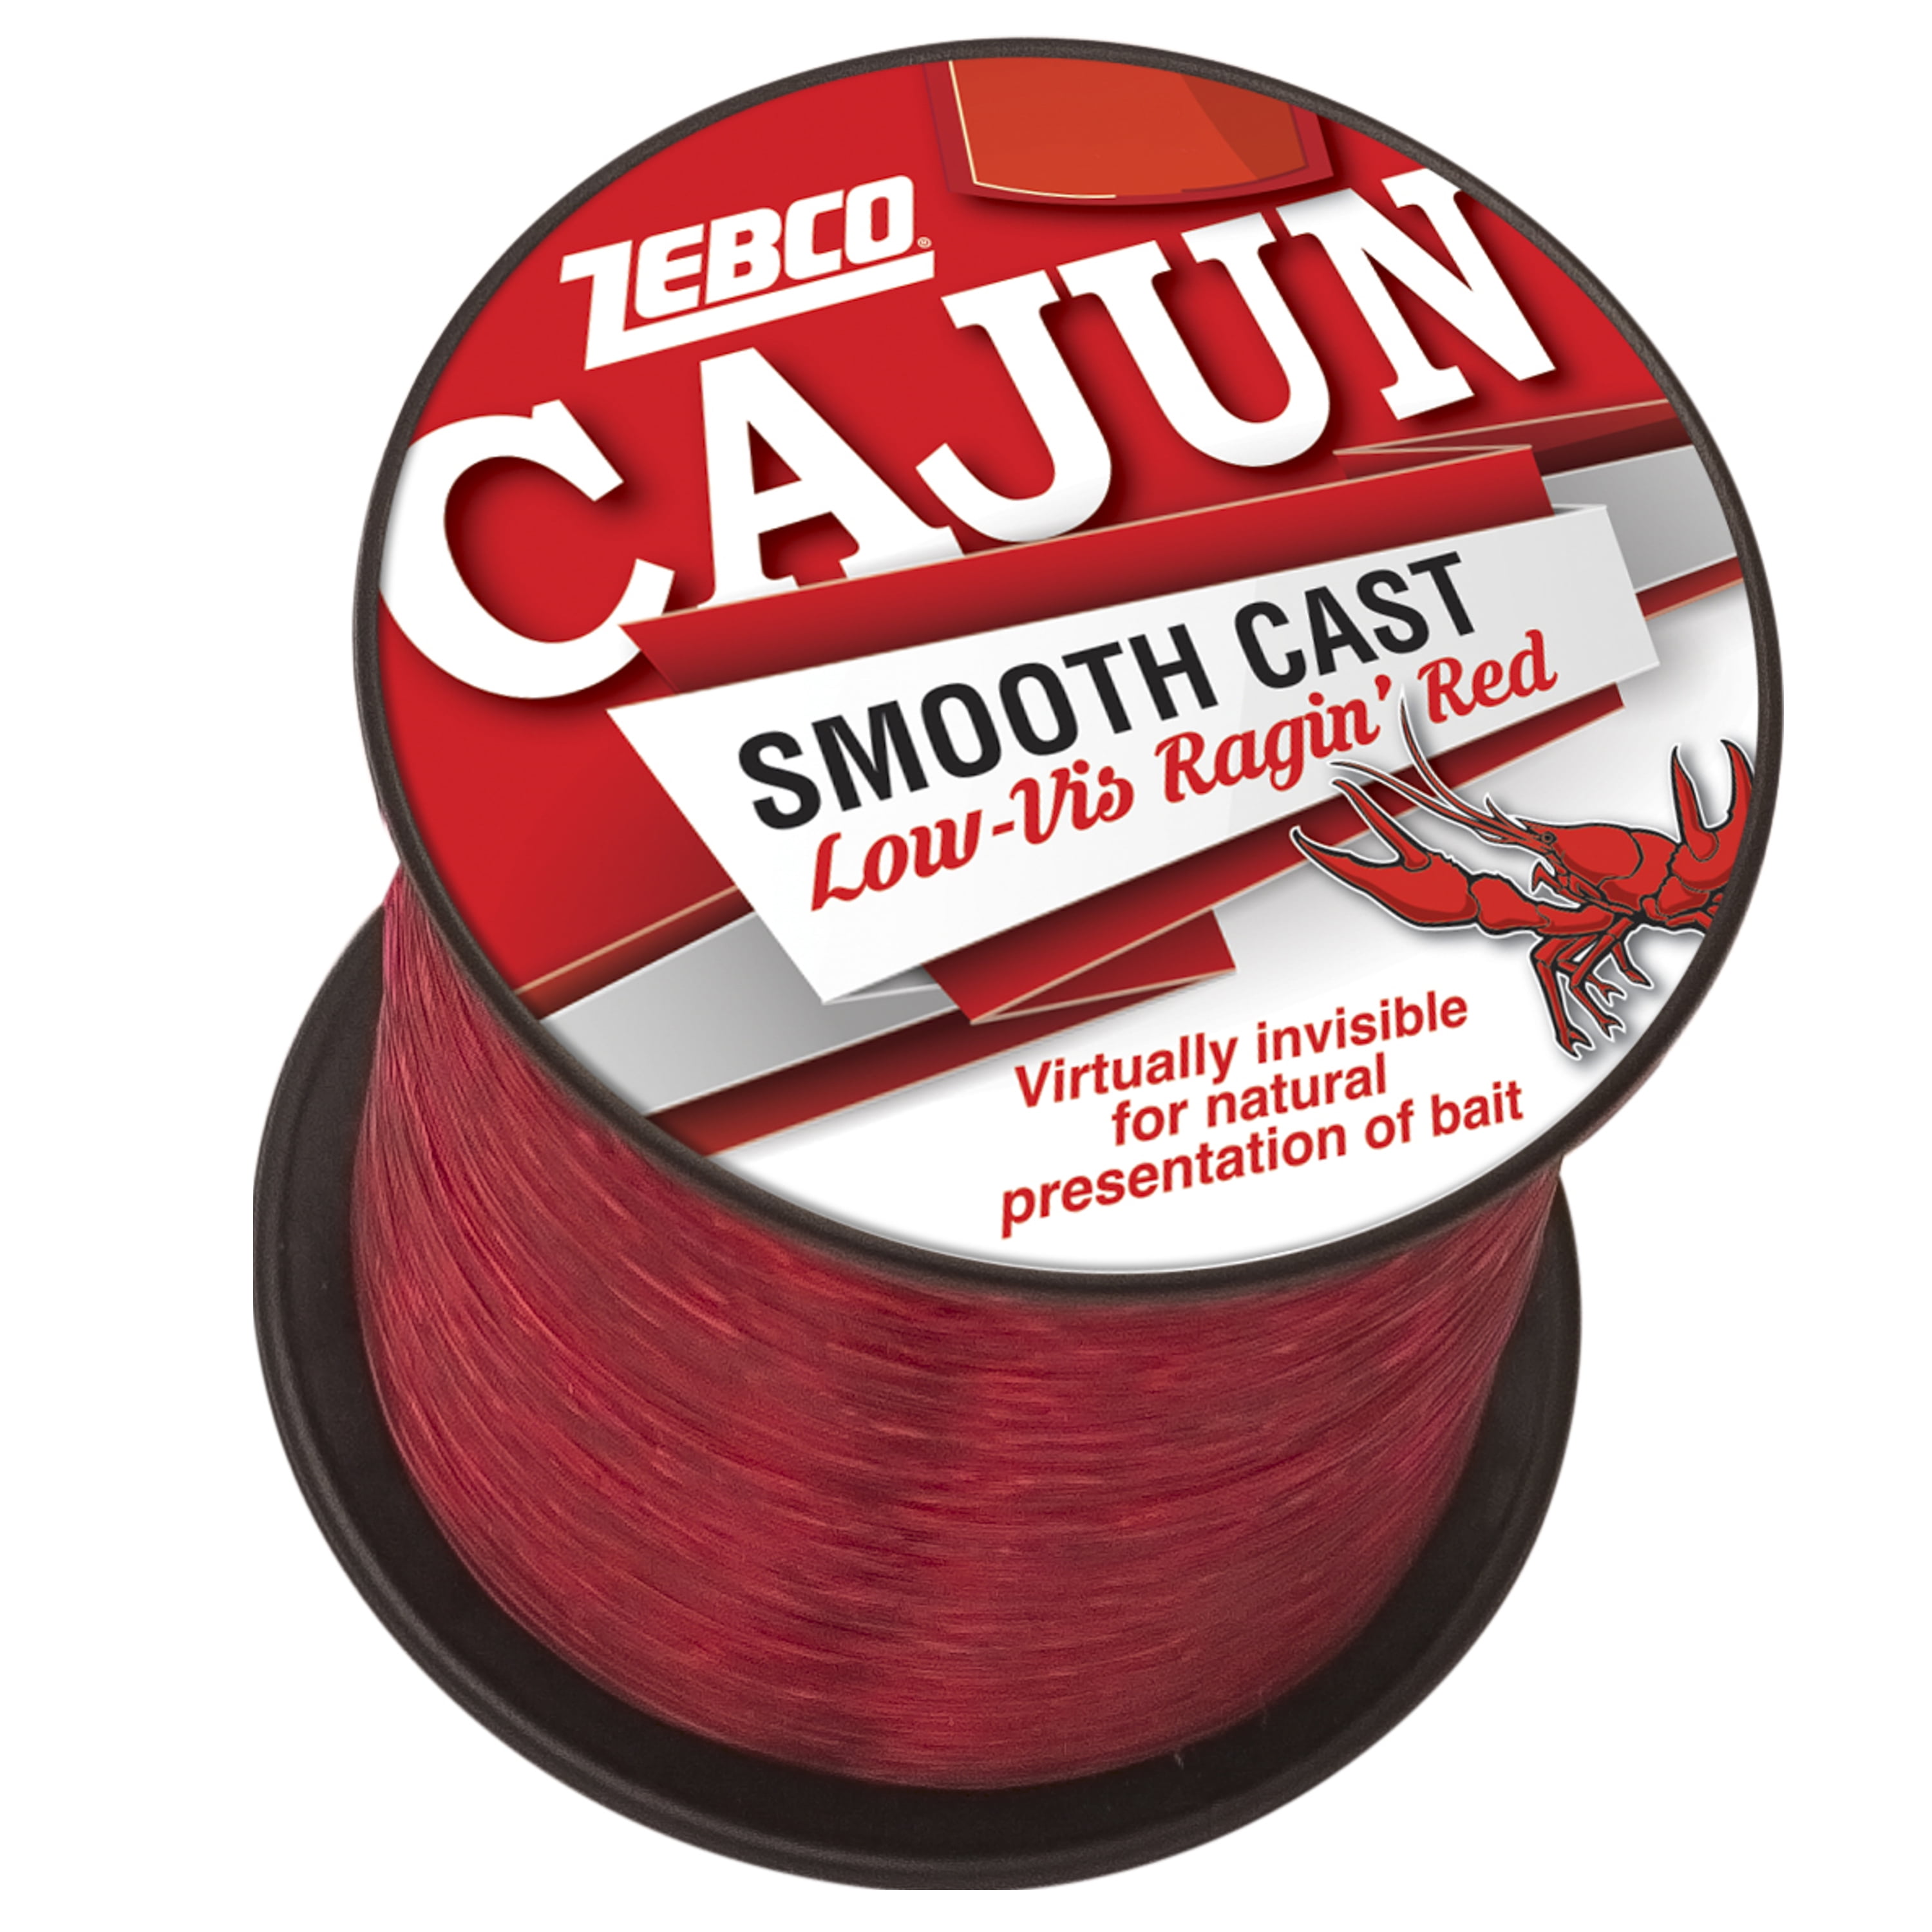 ZEBCO Mono Fishing Line 4lb 700yd  High Strength NEW IN PACK